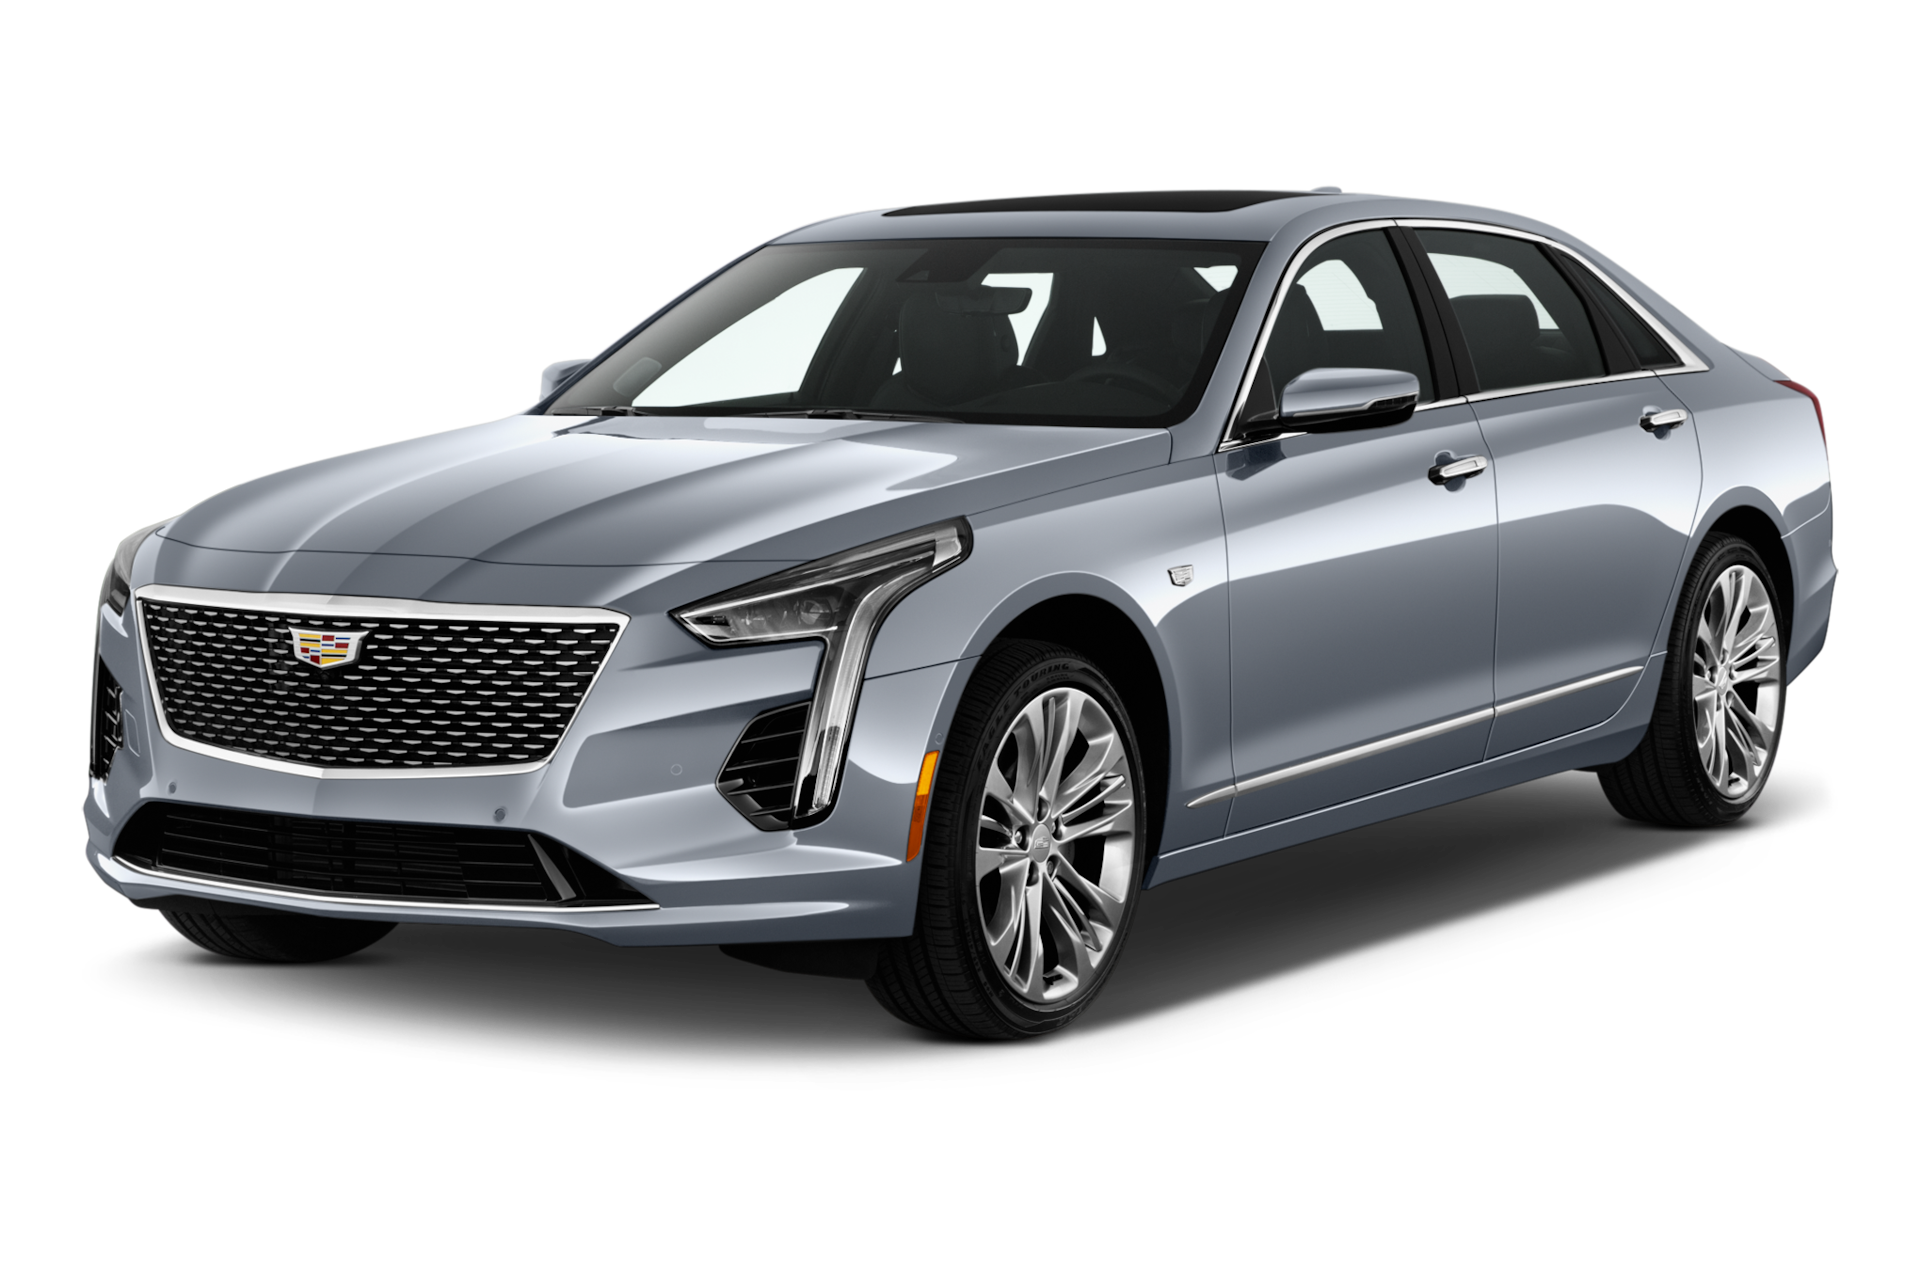 2020 Cadillac CT6 Prices, Reviews, and Photos - MotorTrend